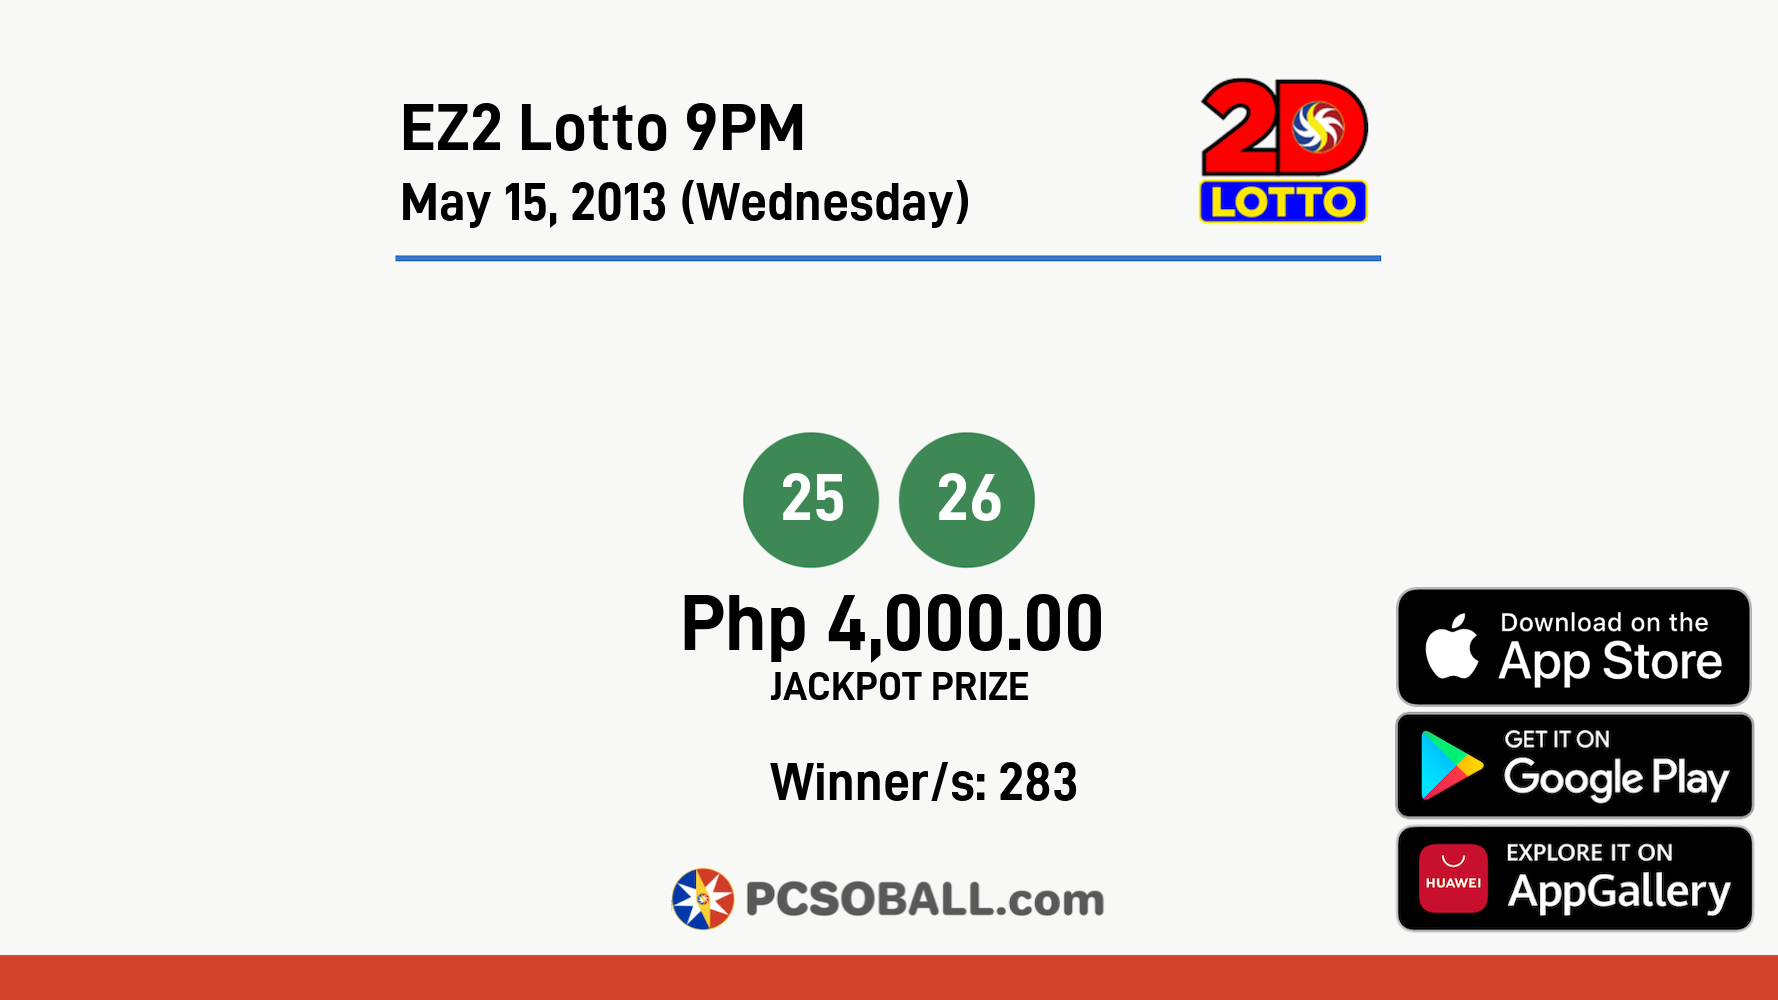 EZ2 Lotto 9PM May 15, 2013 (Wednesday) Result